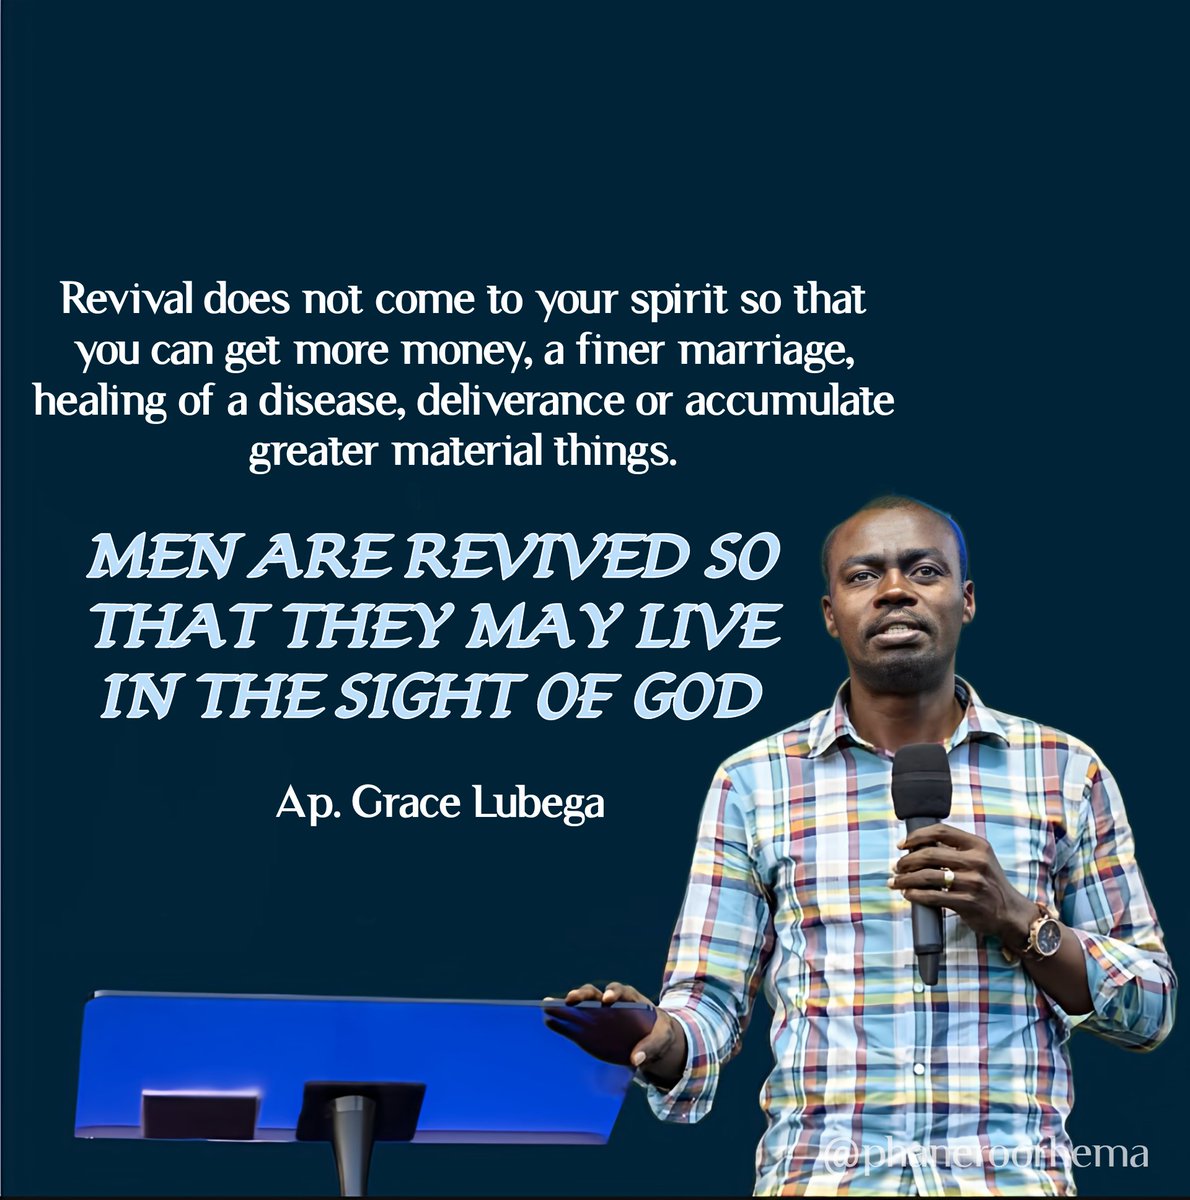 Revival does not come to your spirit so that you can get more money, a finer marriage, healing of disease, deliverance or accumulate greater material things. Men are revived so that they may live in the sight of God.

Ap. Grace Lubega
#PhanerooRhema
#CatchTheFire2024
#AruaEdition